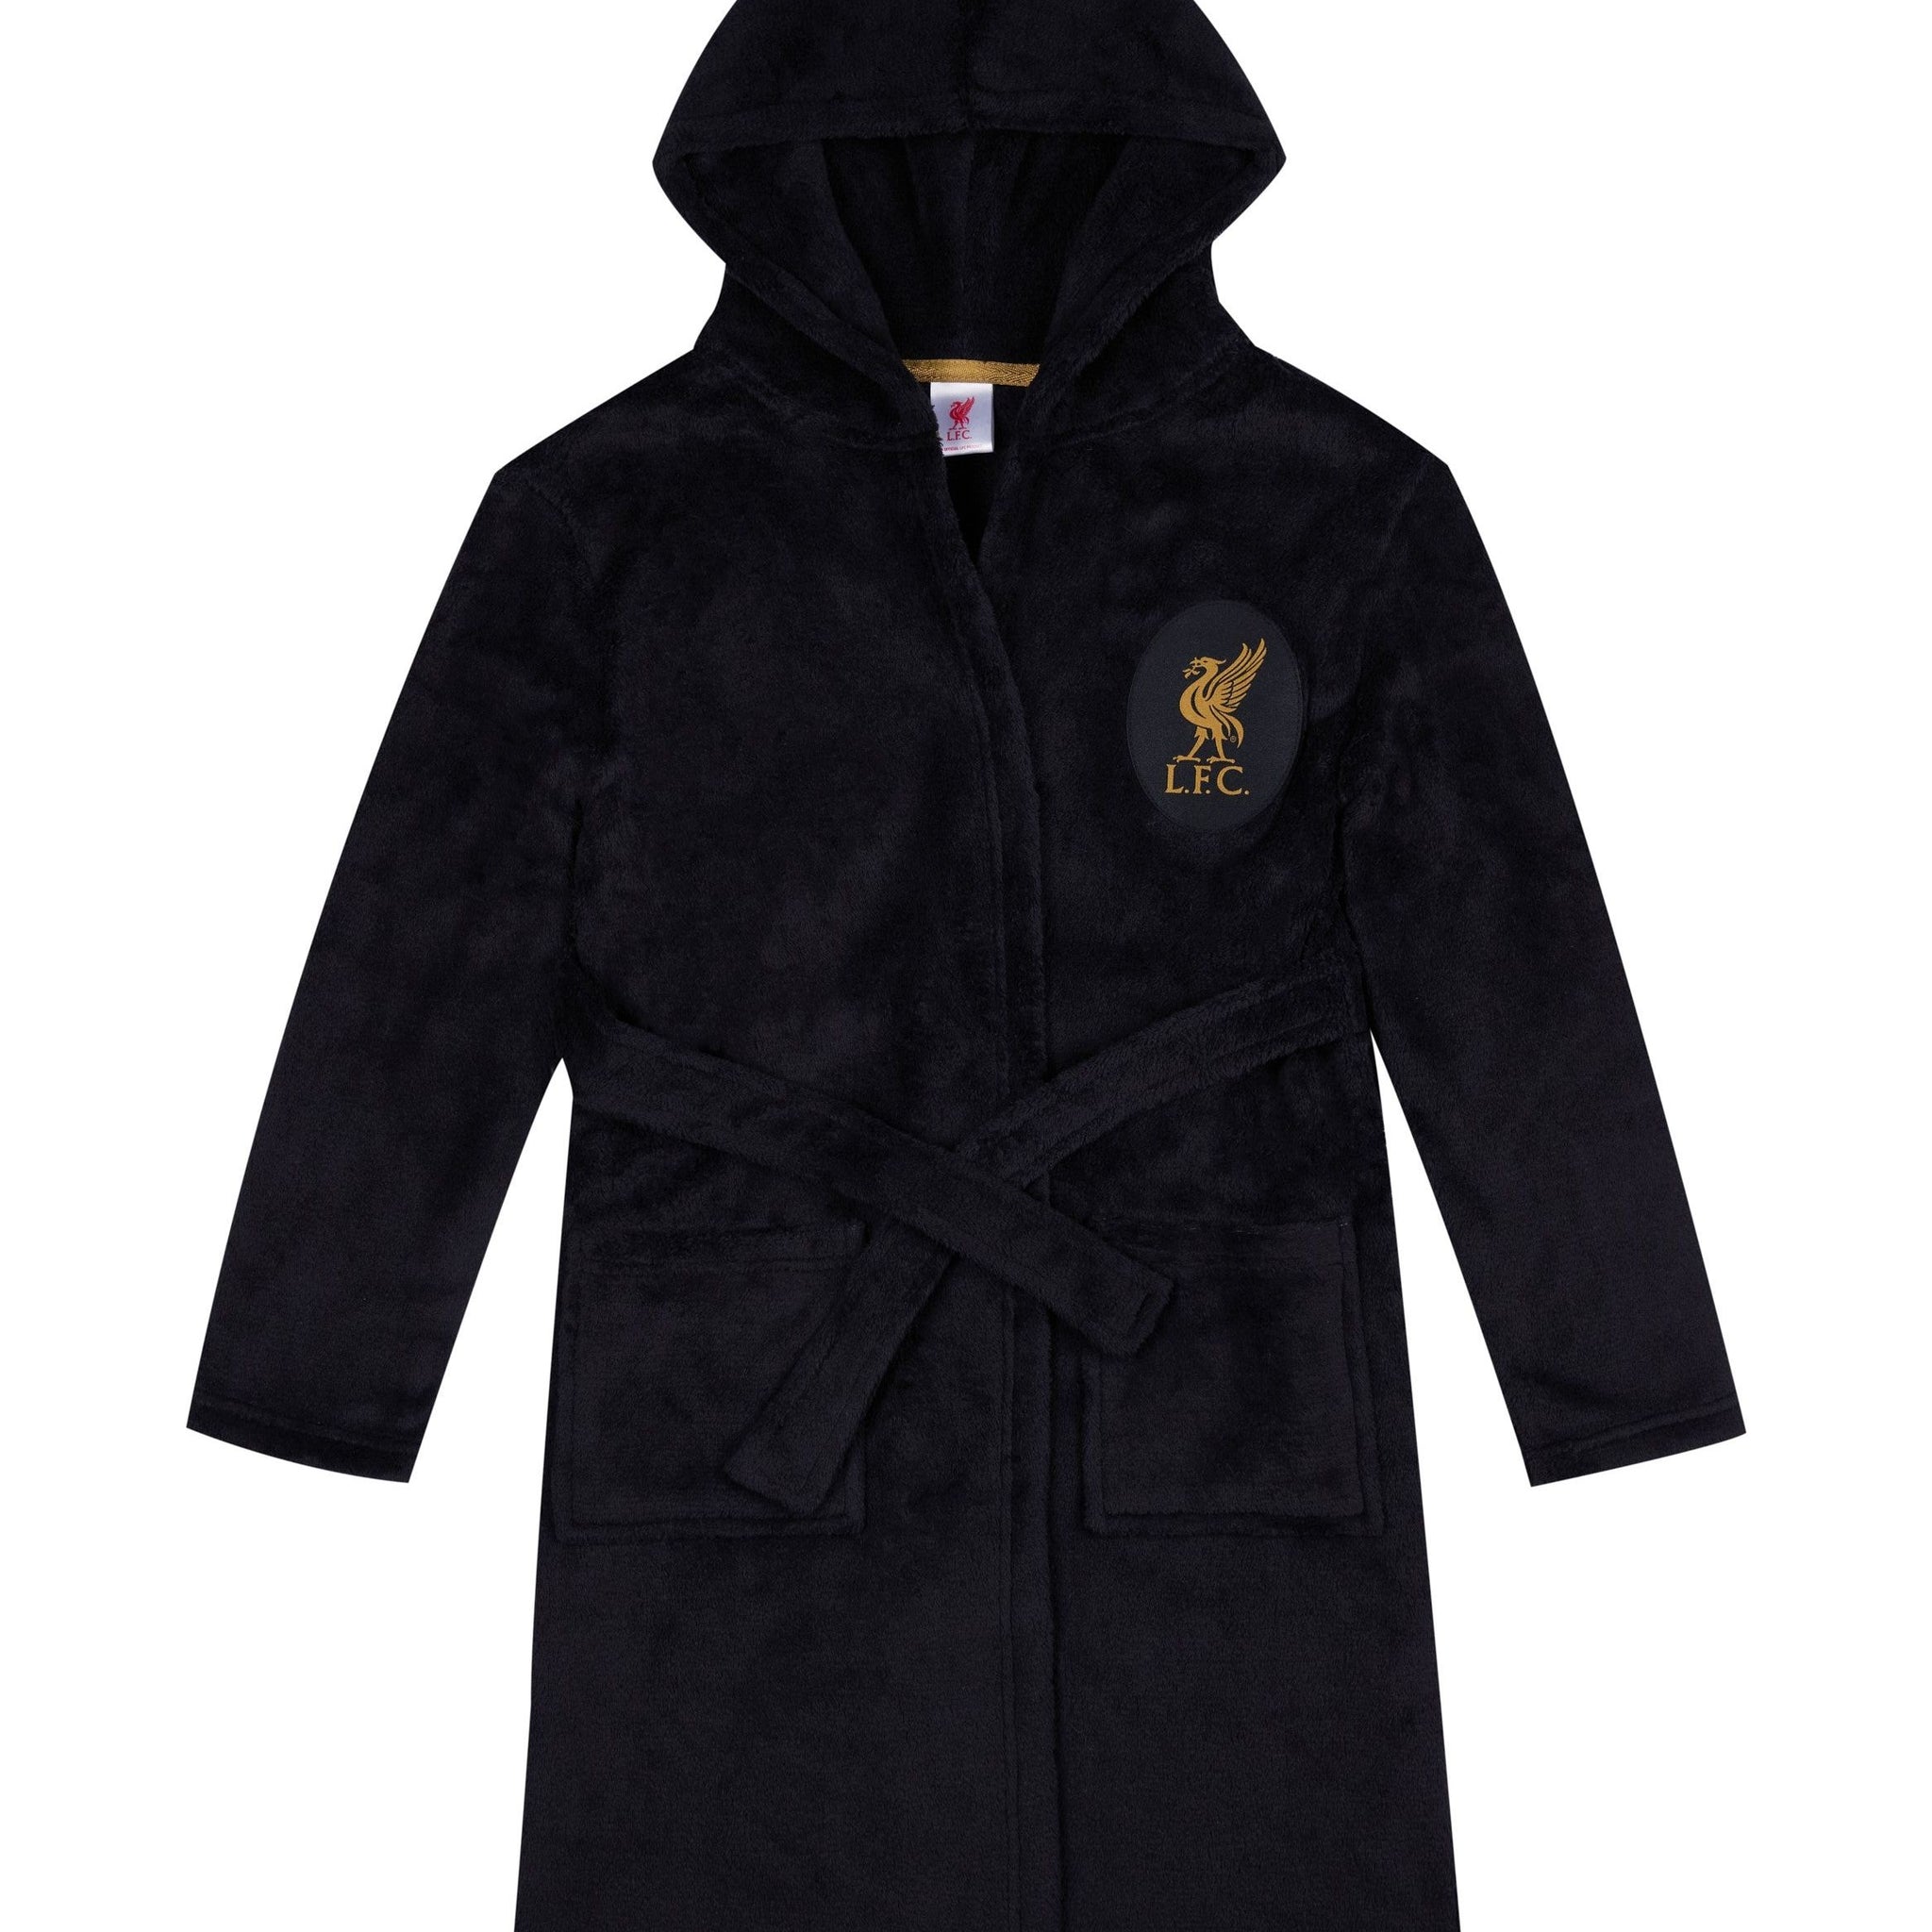 Boys Official Liverpool F.C Black Gold Dressing Gown